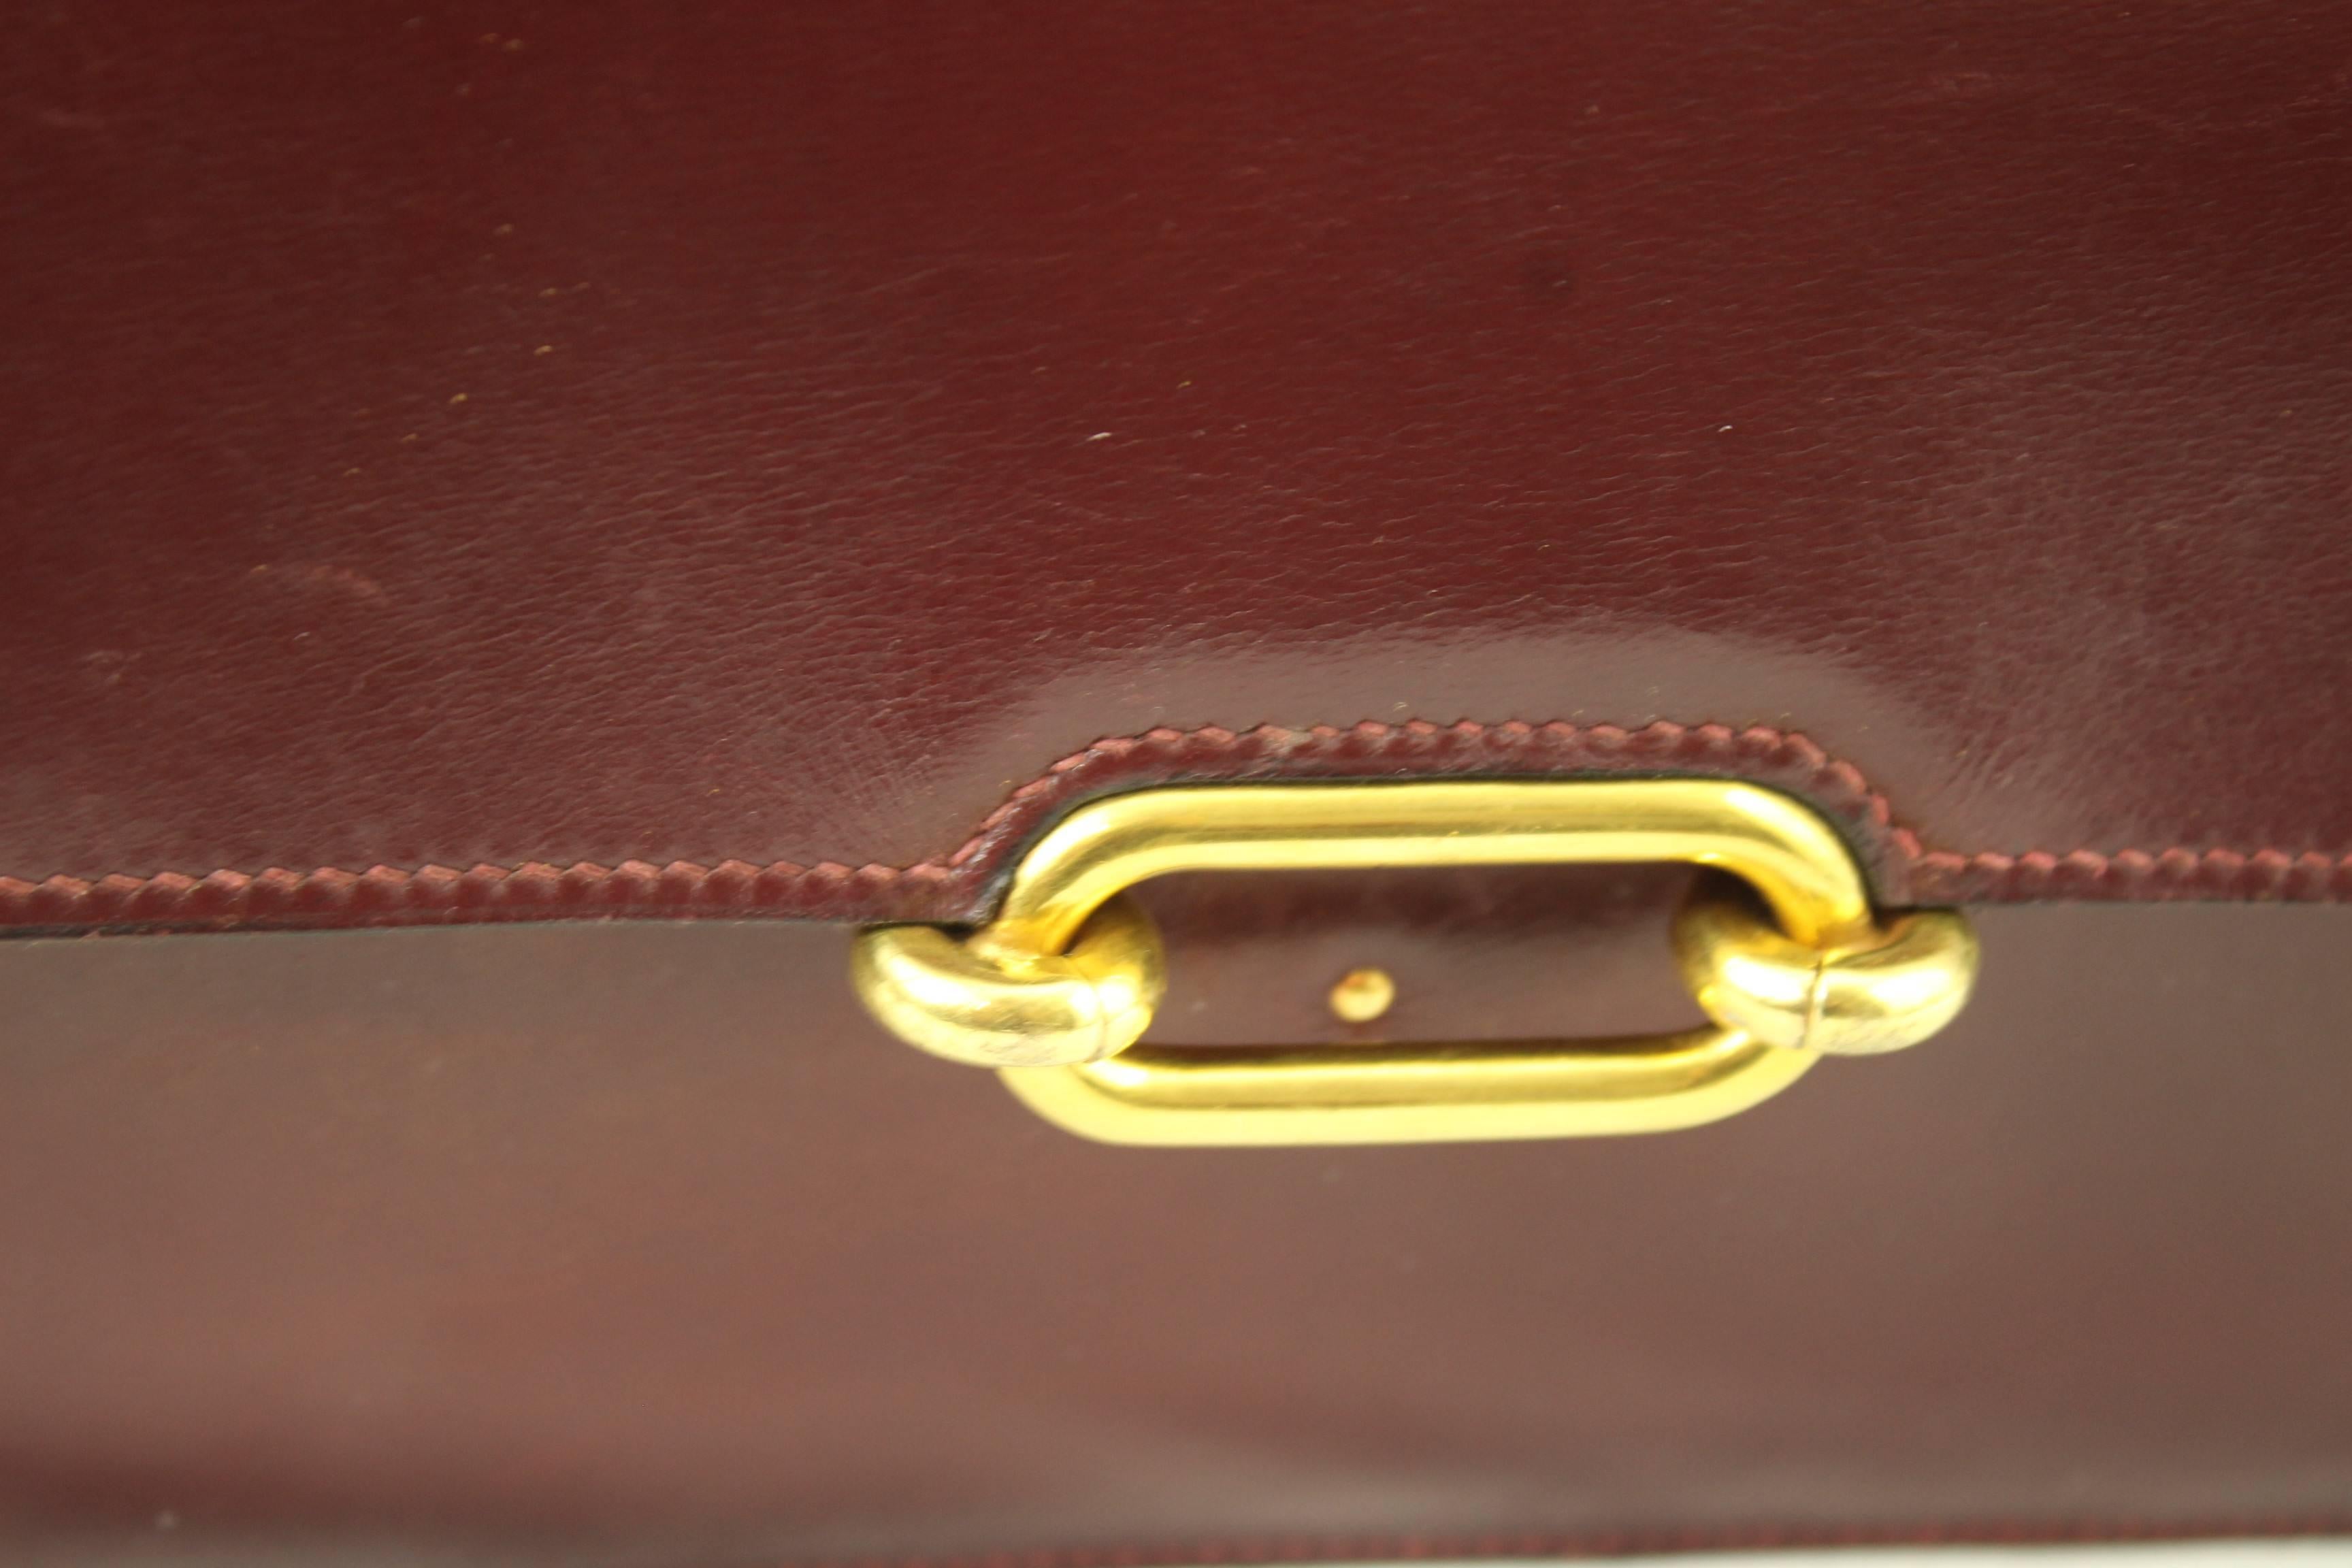 Really nice Hermes Fontbelle vintage bag in bugundy box leather  and golden hardware.

Some signs of wear but nice condition for a bag of more than 50 yeras old.

Corners  in good condition

The stap can be doubled so It could be worn in short